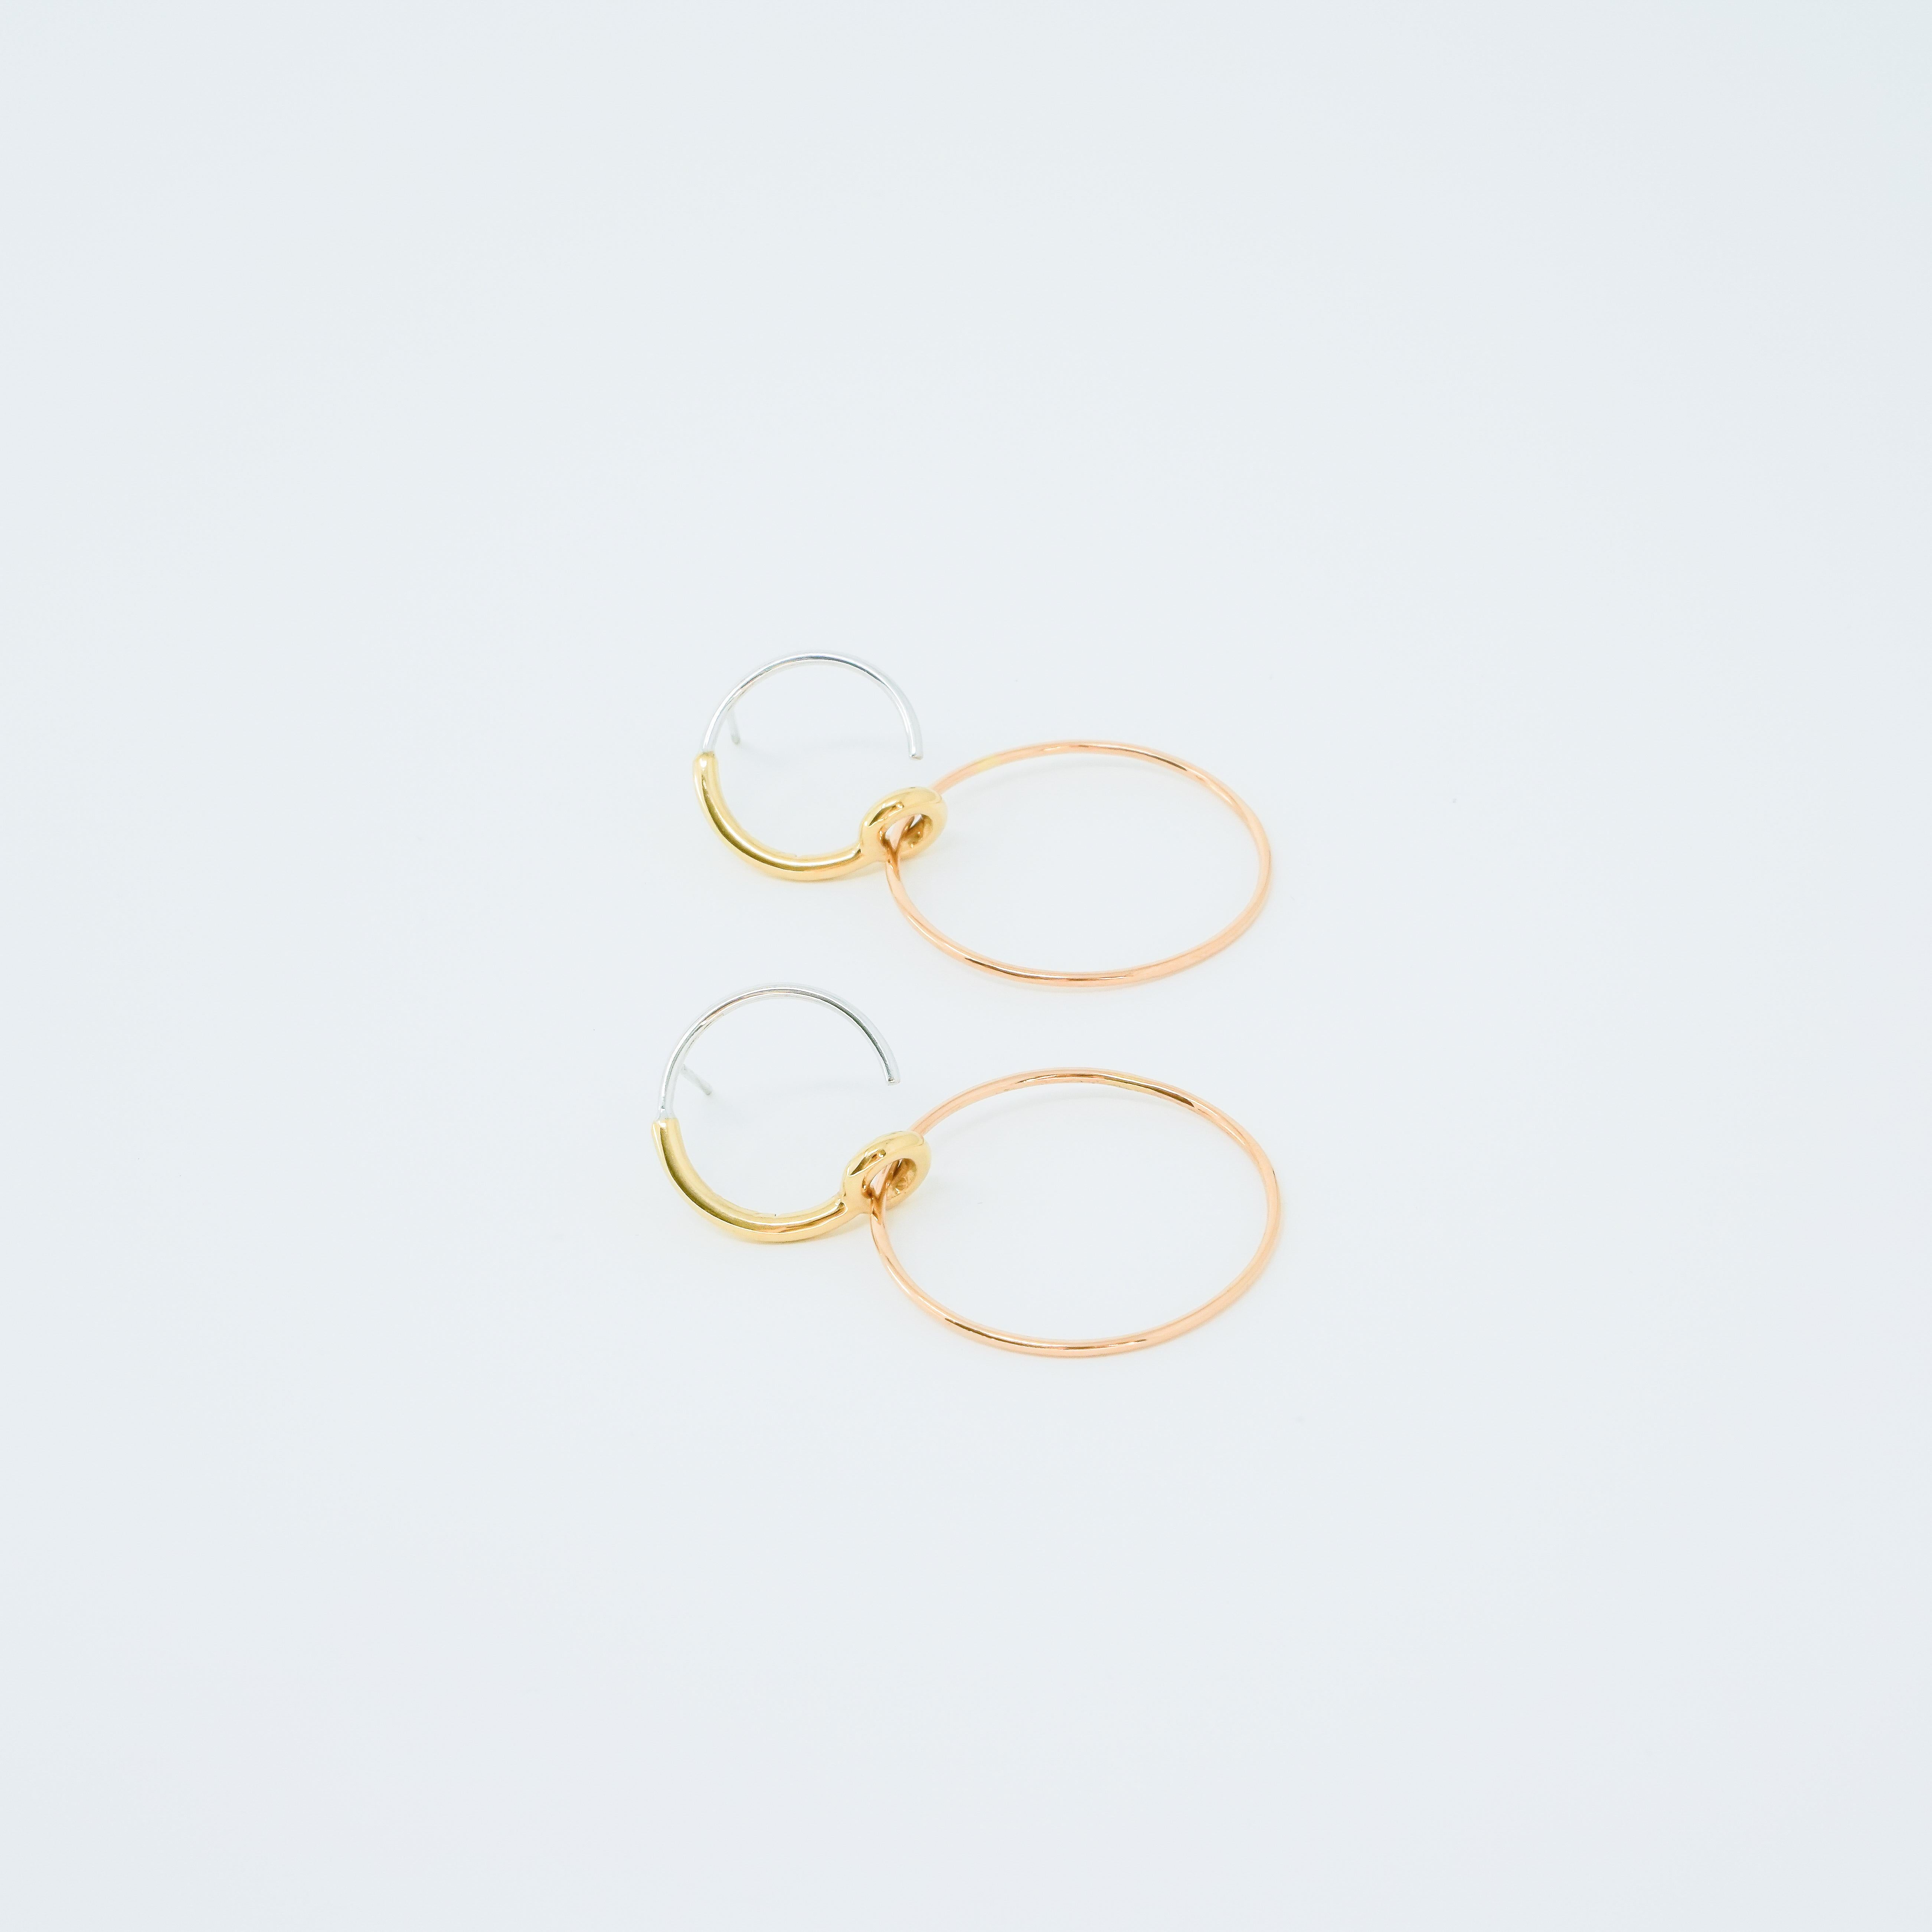 Earrings in 14k yellow gold, 14k rose gold, and 14k white gold with white rhodium plating.

1 QTY in stock/ made to order once sold

Designed and Created by Kat Liu in Washington DC

ABOUT
líeu is a contemporary jewelry studio founded by jewelry